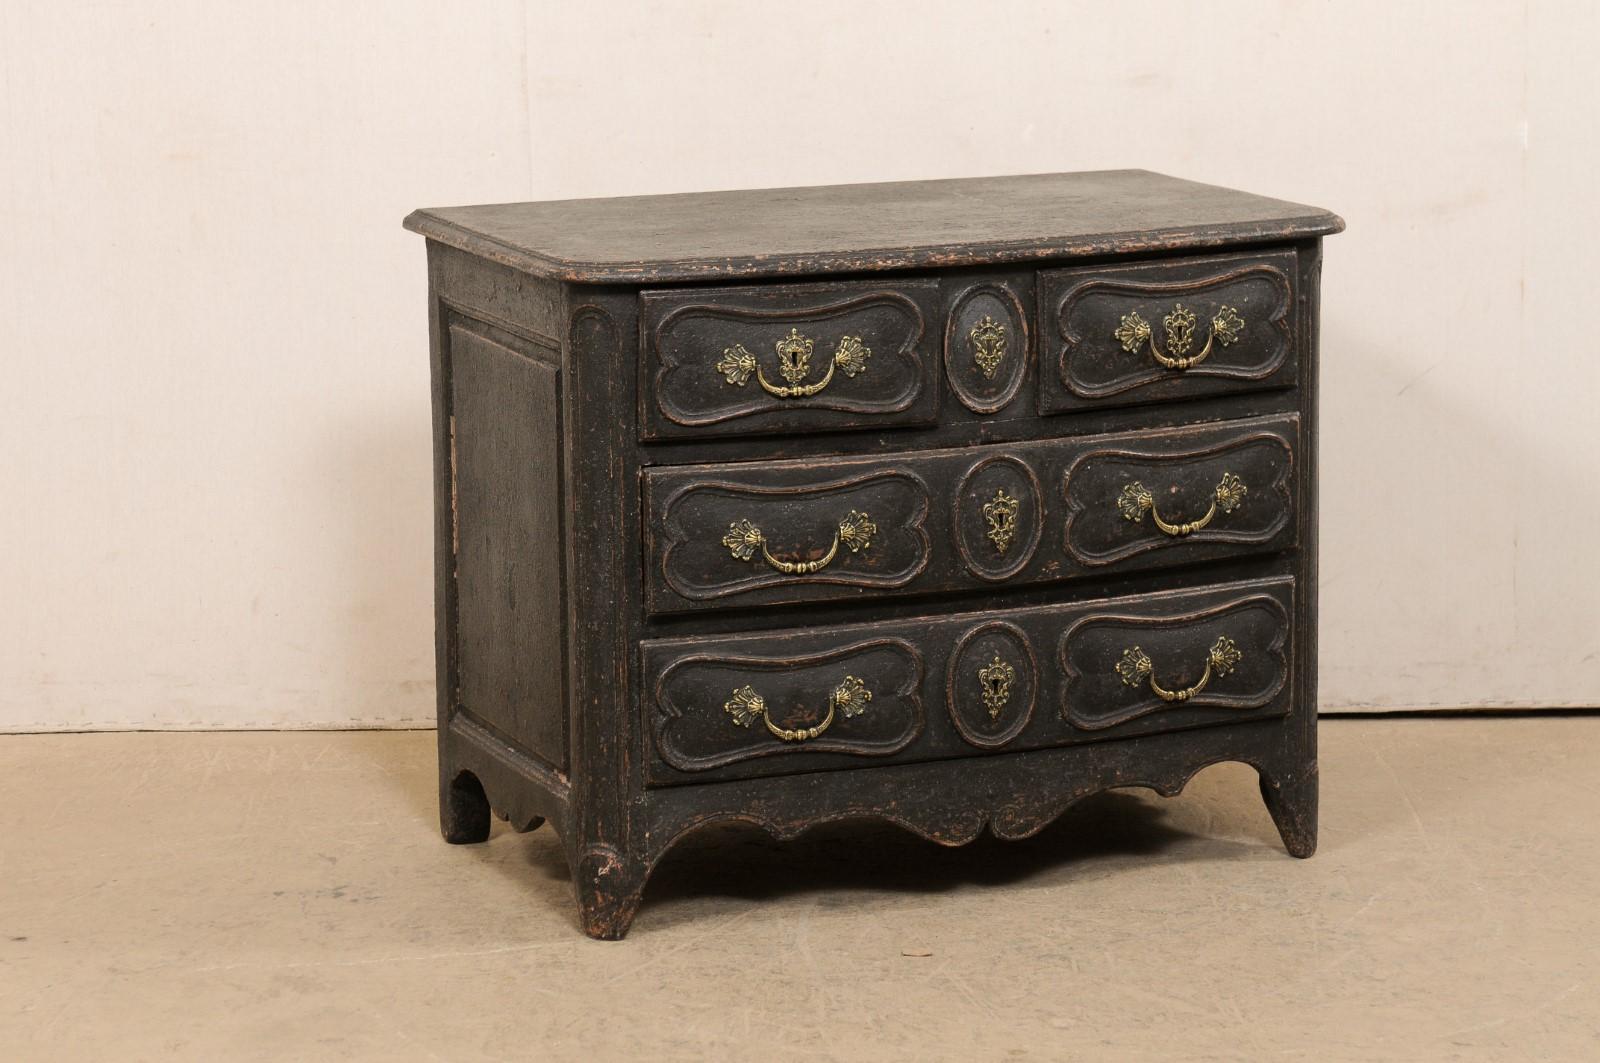 A French Louis XV chest of drawers from the 18th century. This antique commode from France, with is subtle curves and bowed front, houses two half-sized drawers atop two full sized drawers, flanked within rounded side posts, and raised panel sides.